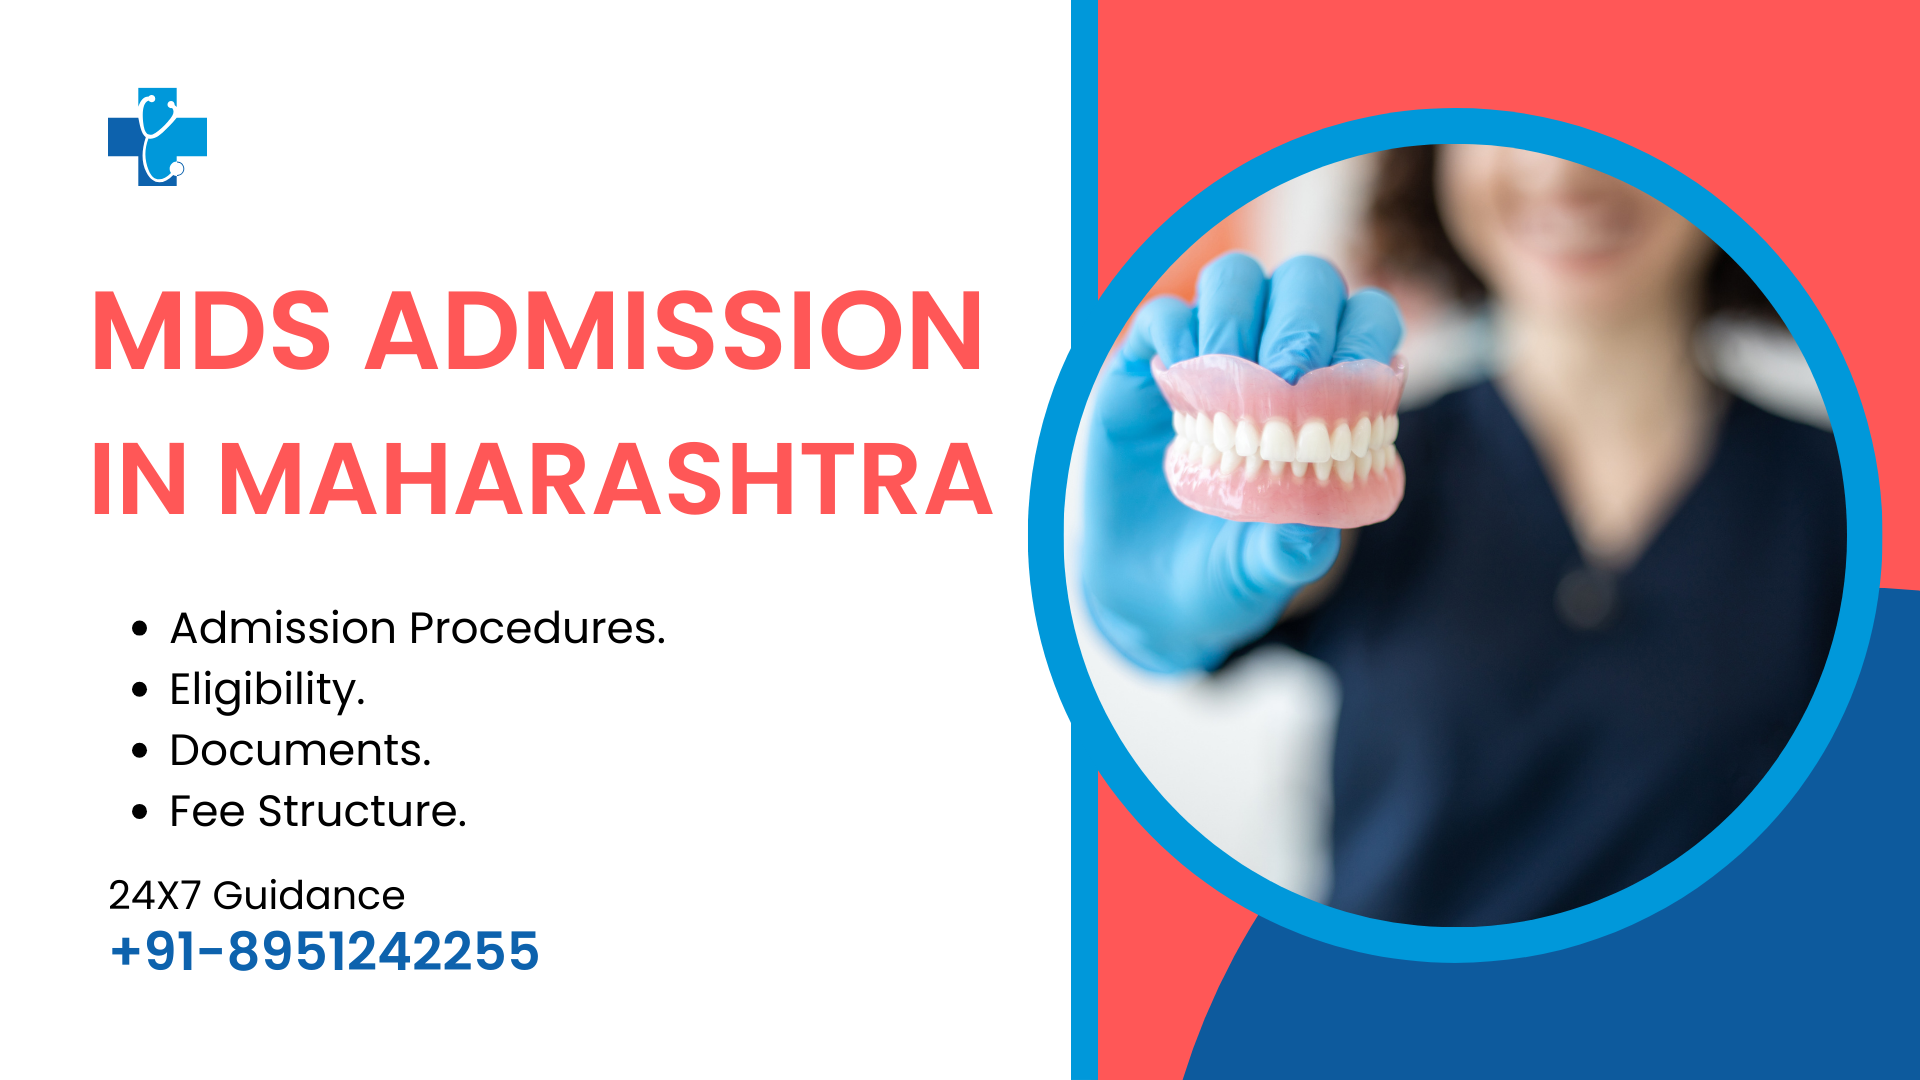 MDS Admission in Maharashtra with fee structure